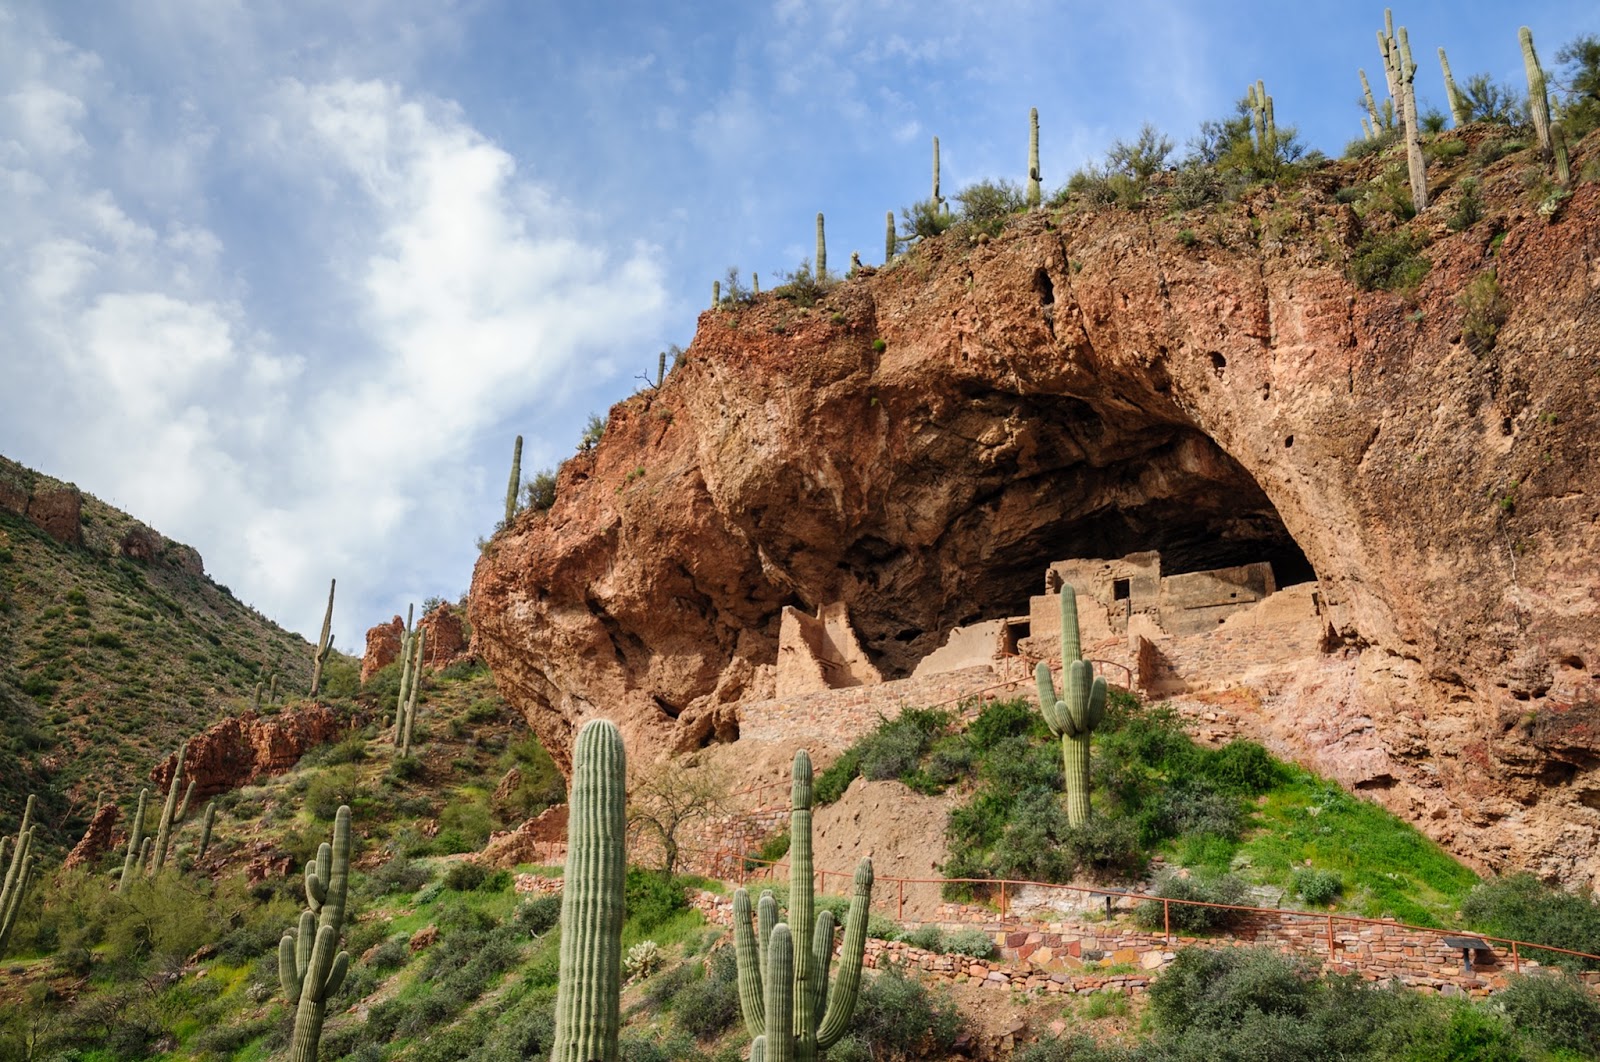 Arizona Is More Than the Grand Canyon. Here Are Other National Parks to Visit.